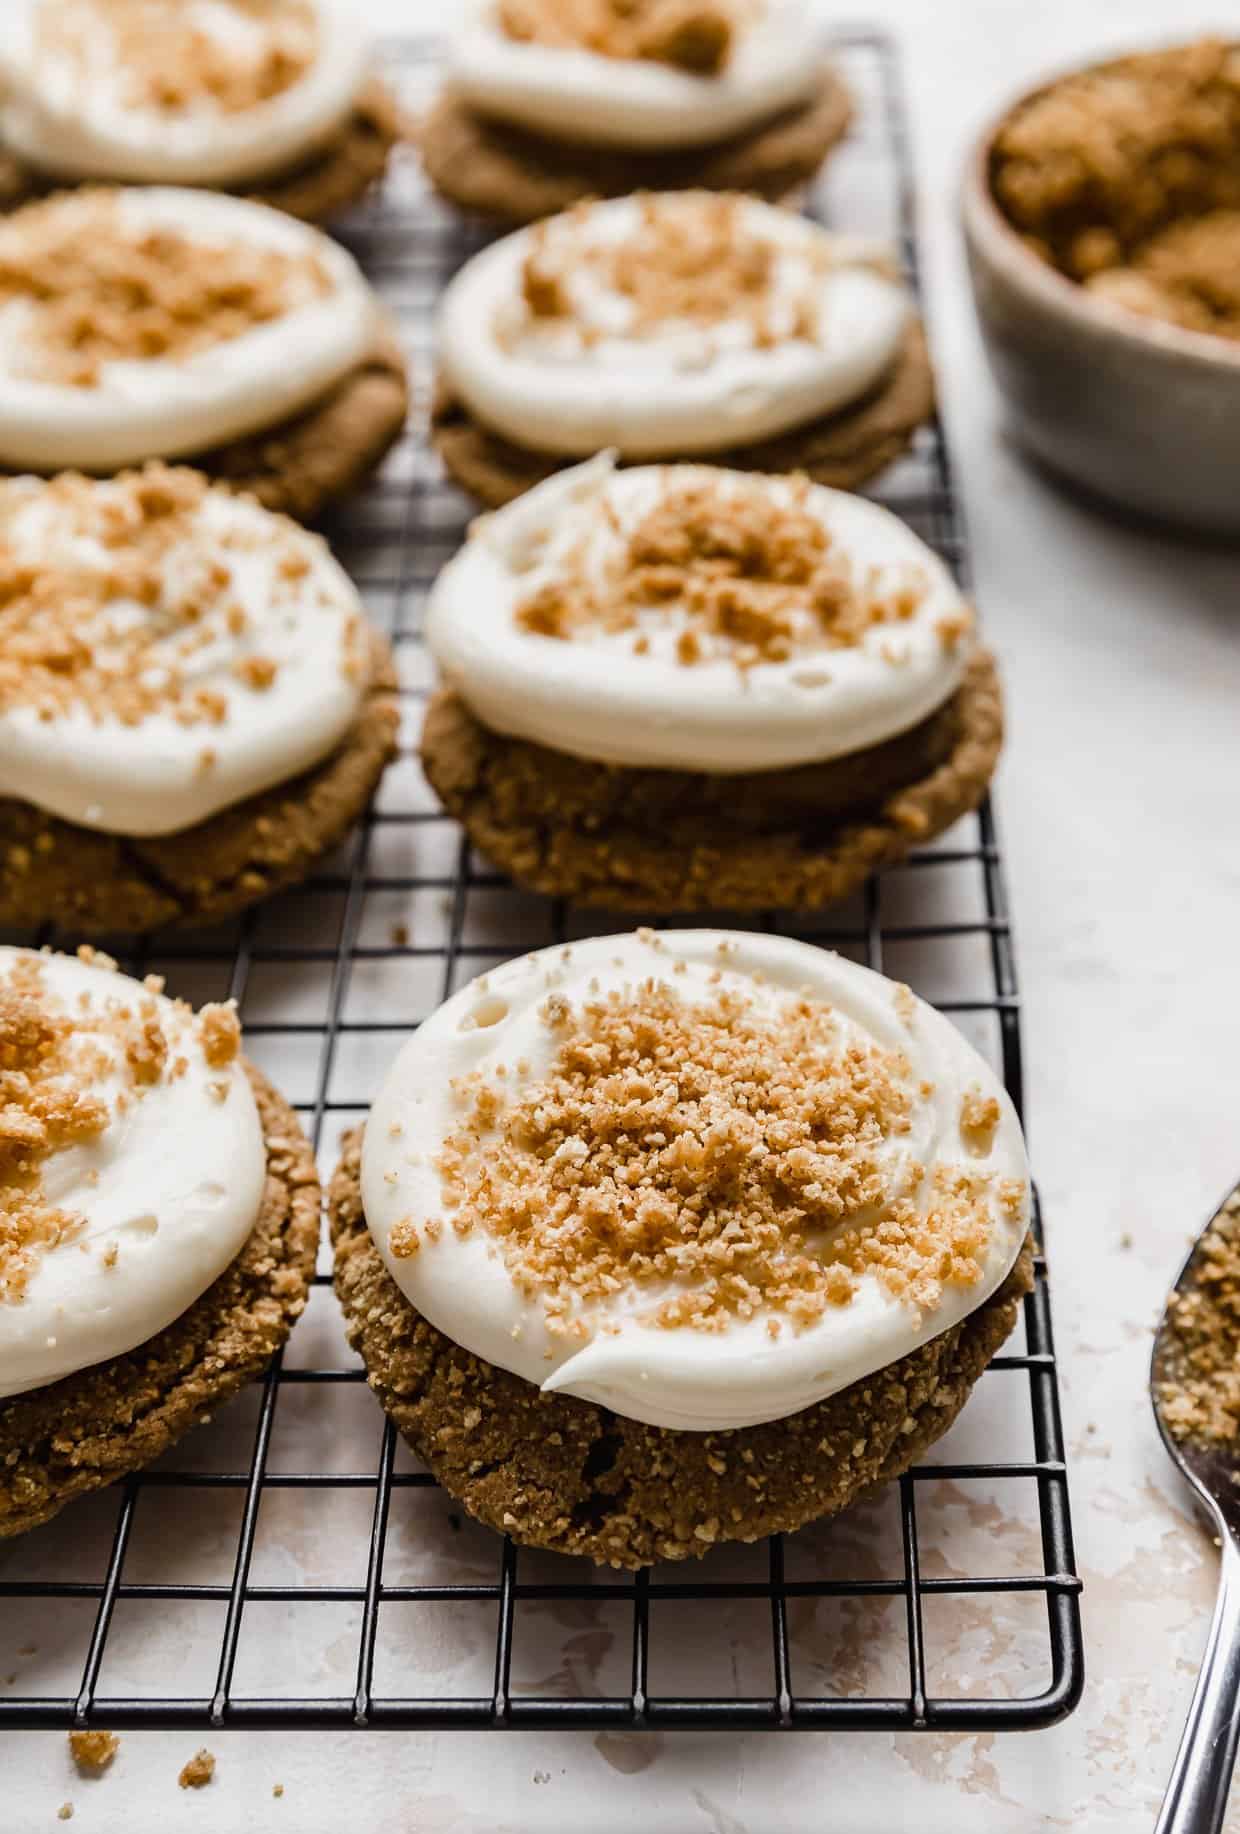 Crumbl New York Cheesecake Cookies with frosting on top of each cookie and graham cracker sprinkled overtop.